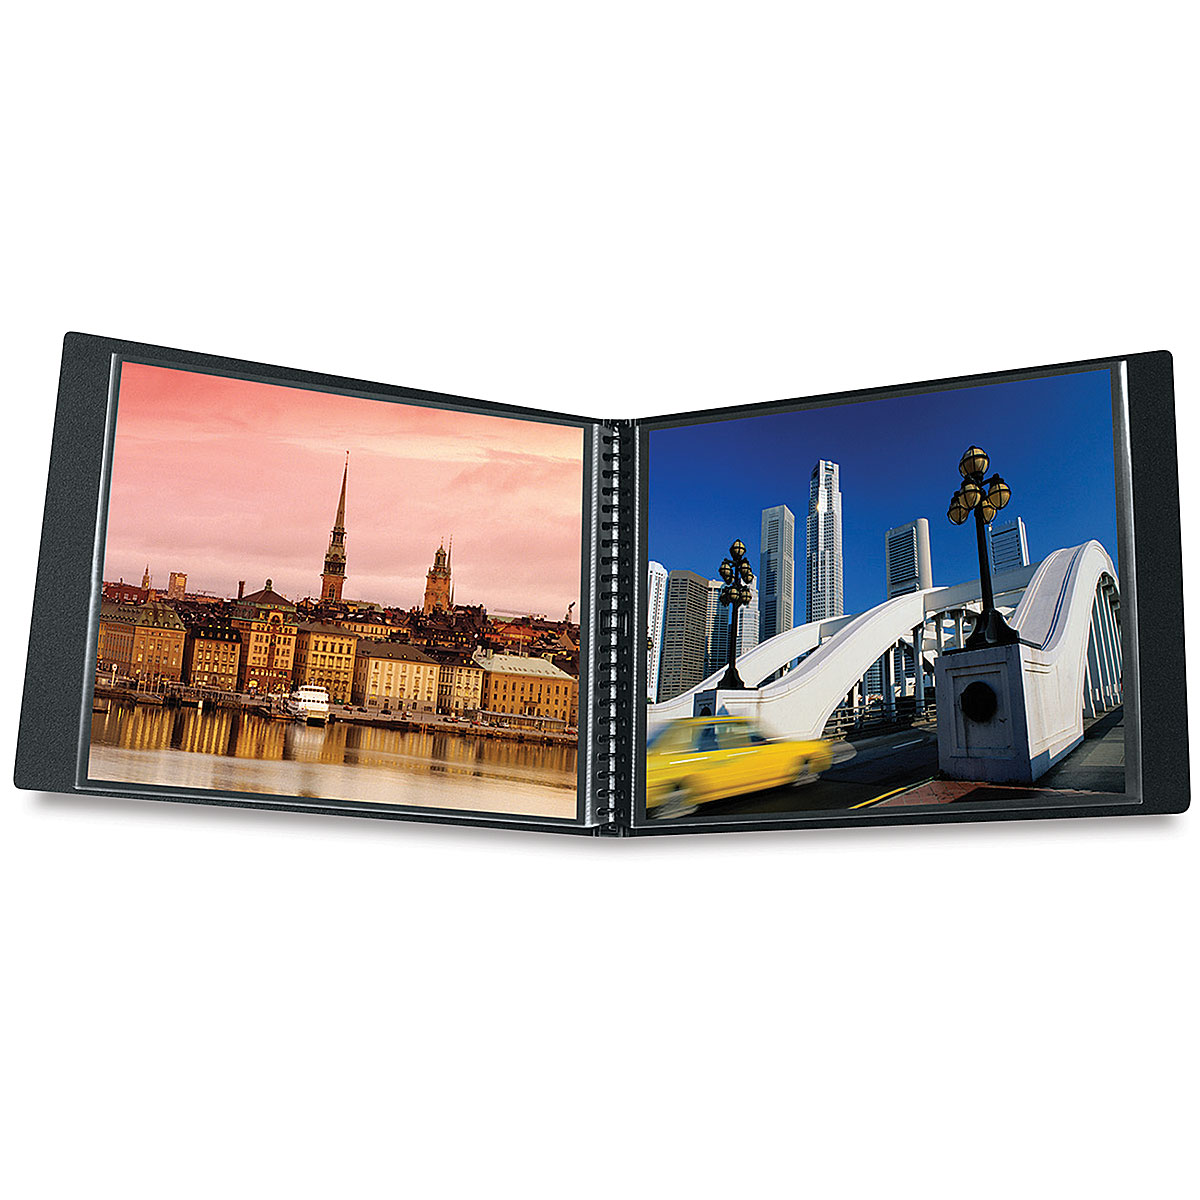 The Art Profolio Multi-Ring 13x19 Refillable Album by Itoya® with